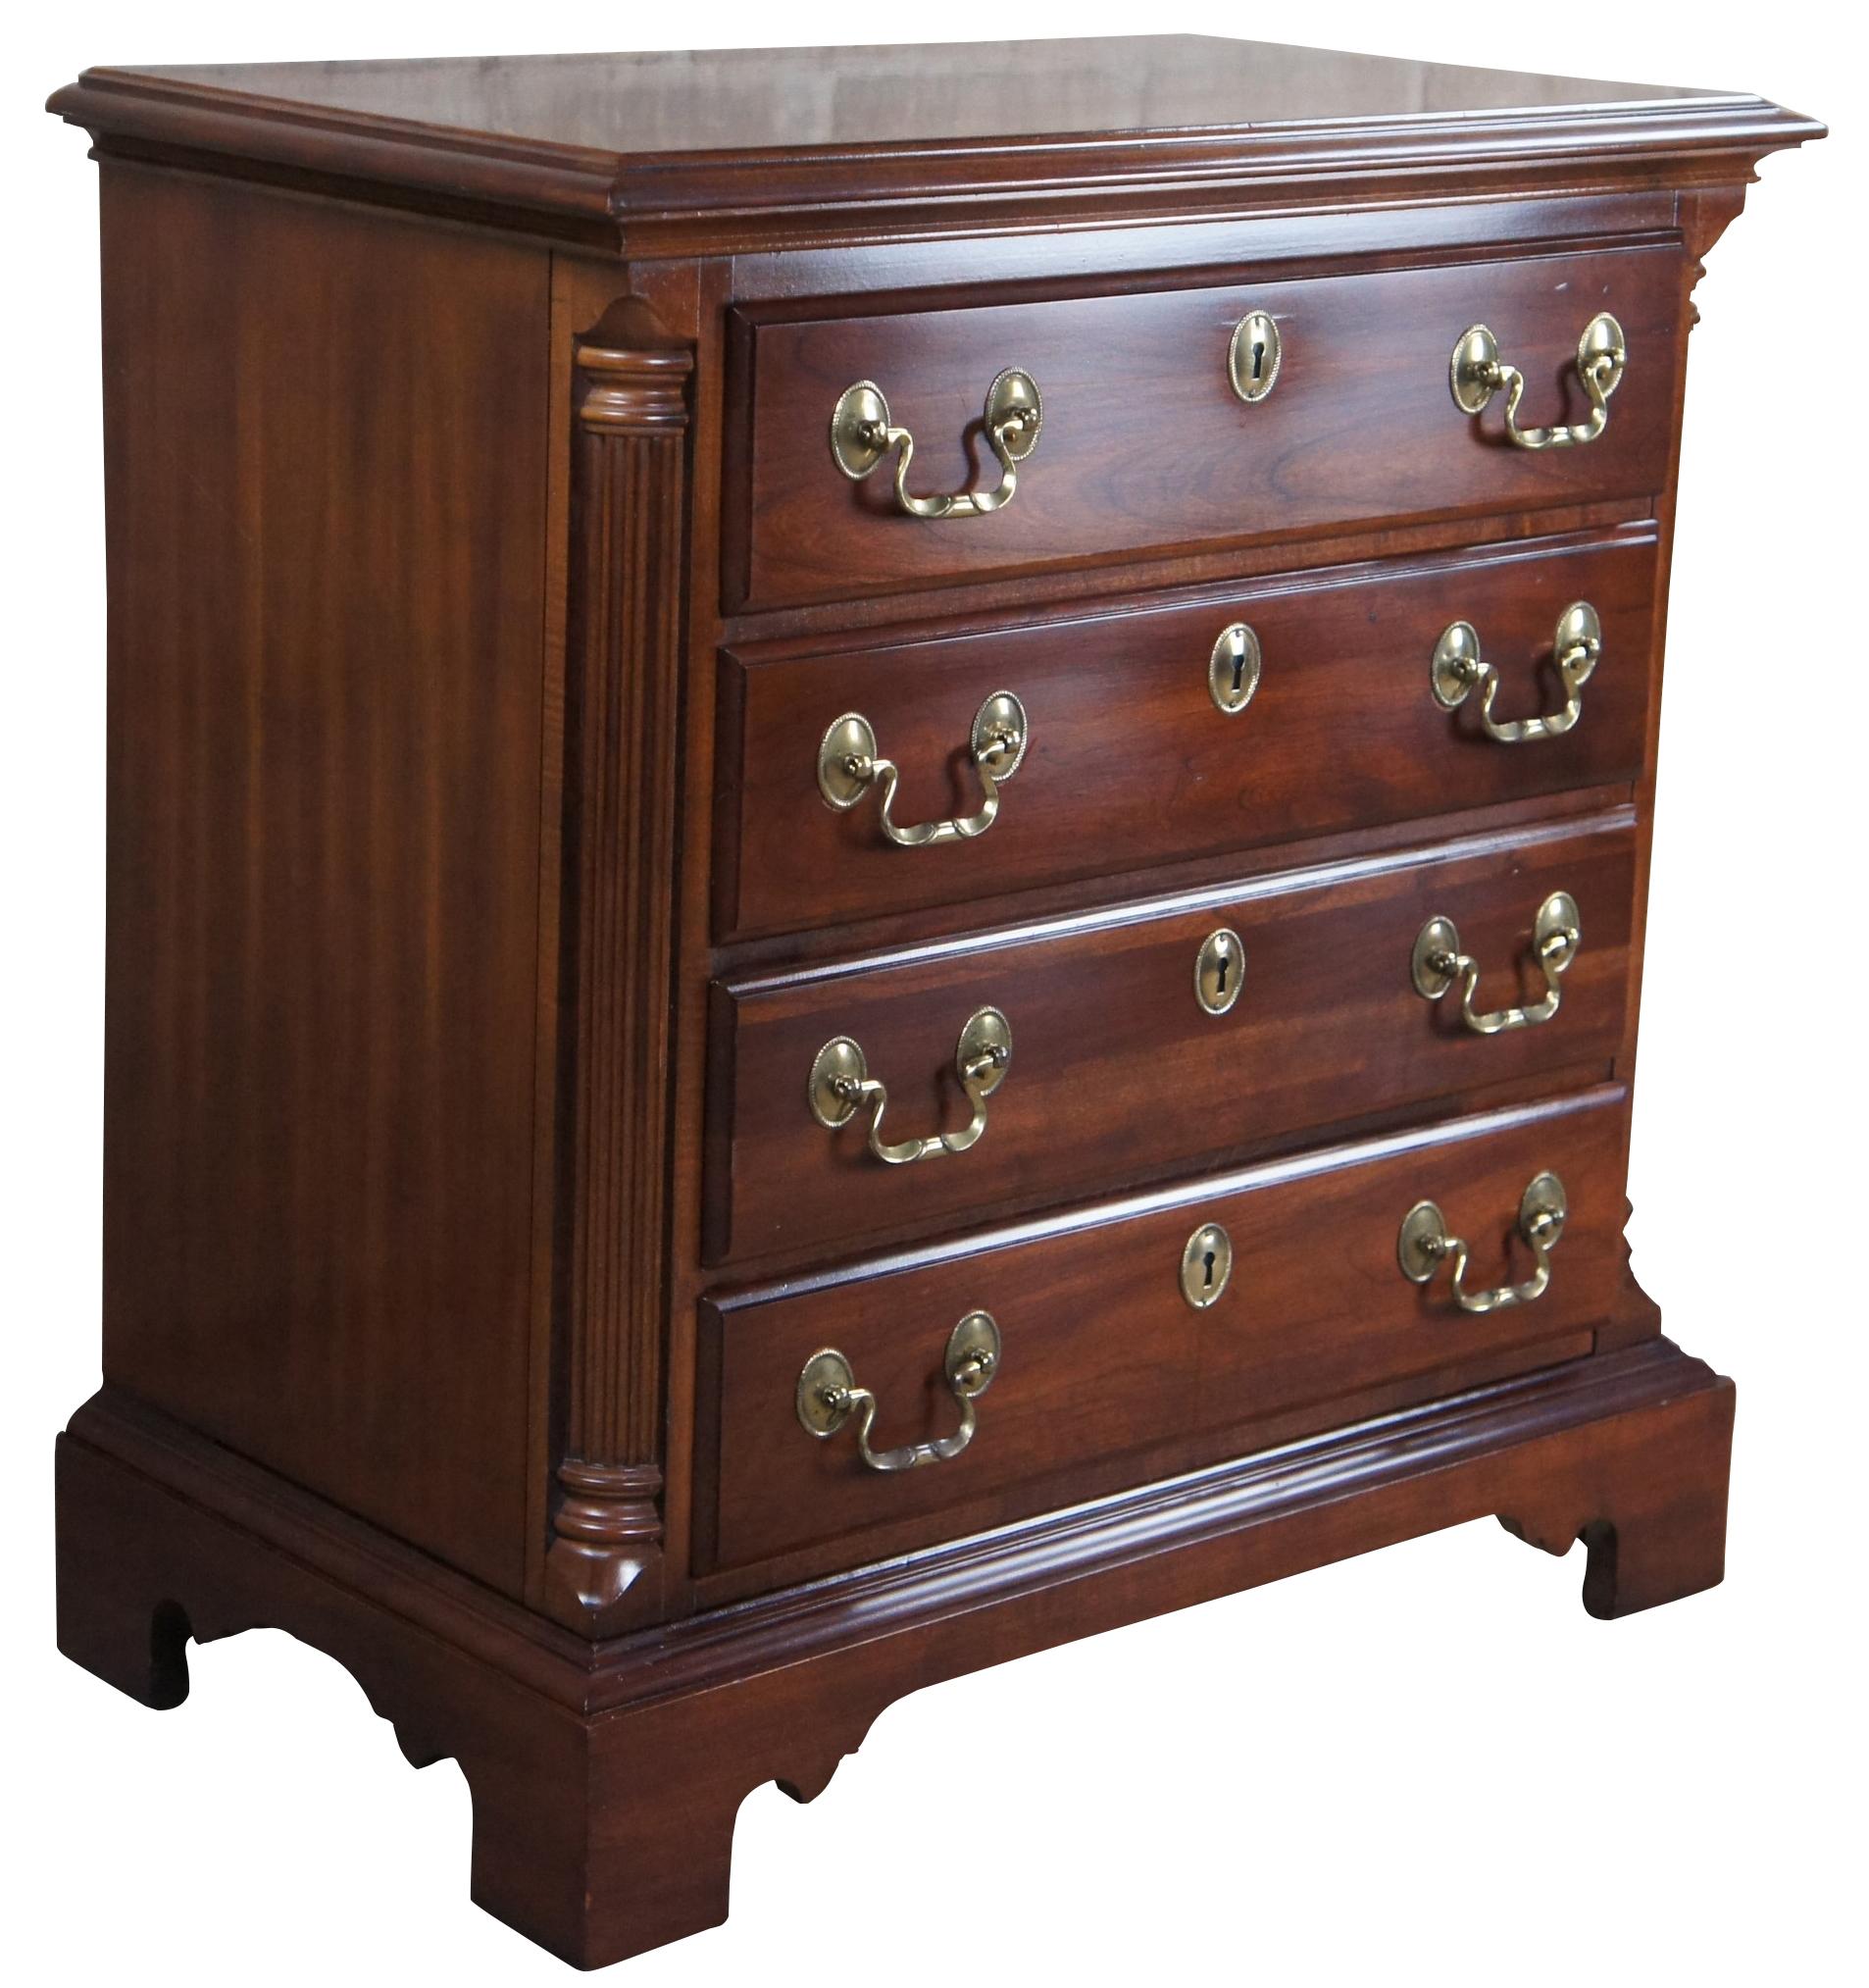 Vintage National Mt. Airy four drawer dimunitive chest, nightstand or side table, circa last quarter 20th century.  Made of cherry featuring rectangular form with quarter cut grecian fluted columns,  brass bail drawer pulls, and bracket feet.
